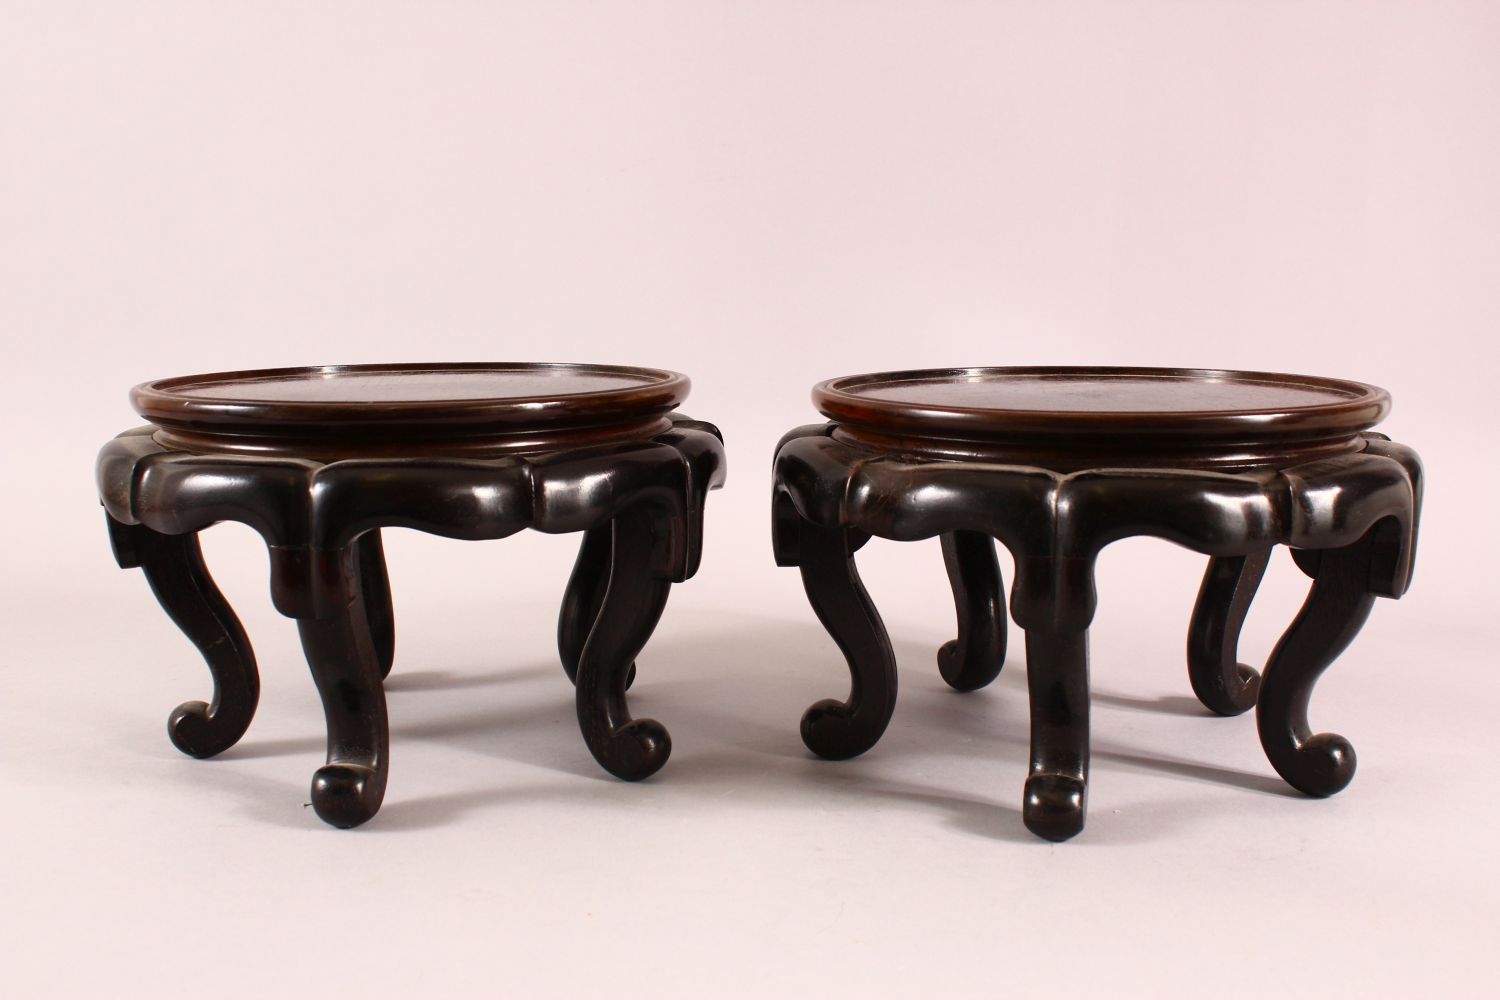 A PAIR OF 19TH CENTURY CHINESE CARVED HARDWOOD STANDS. each with five curving feet, 26cm wide - Image 3 of 4